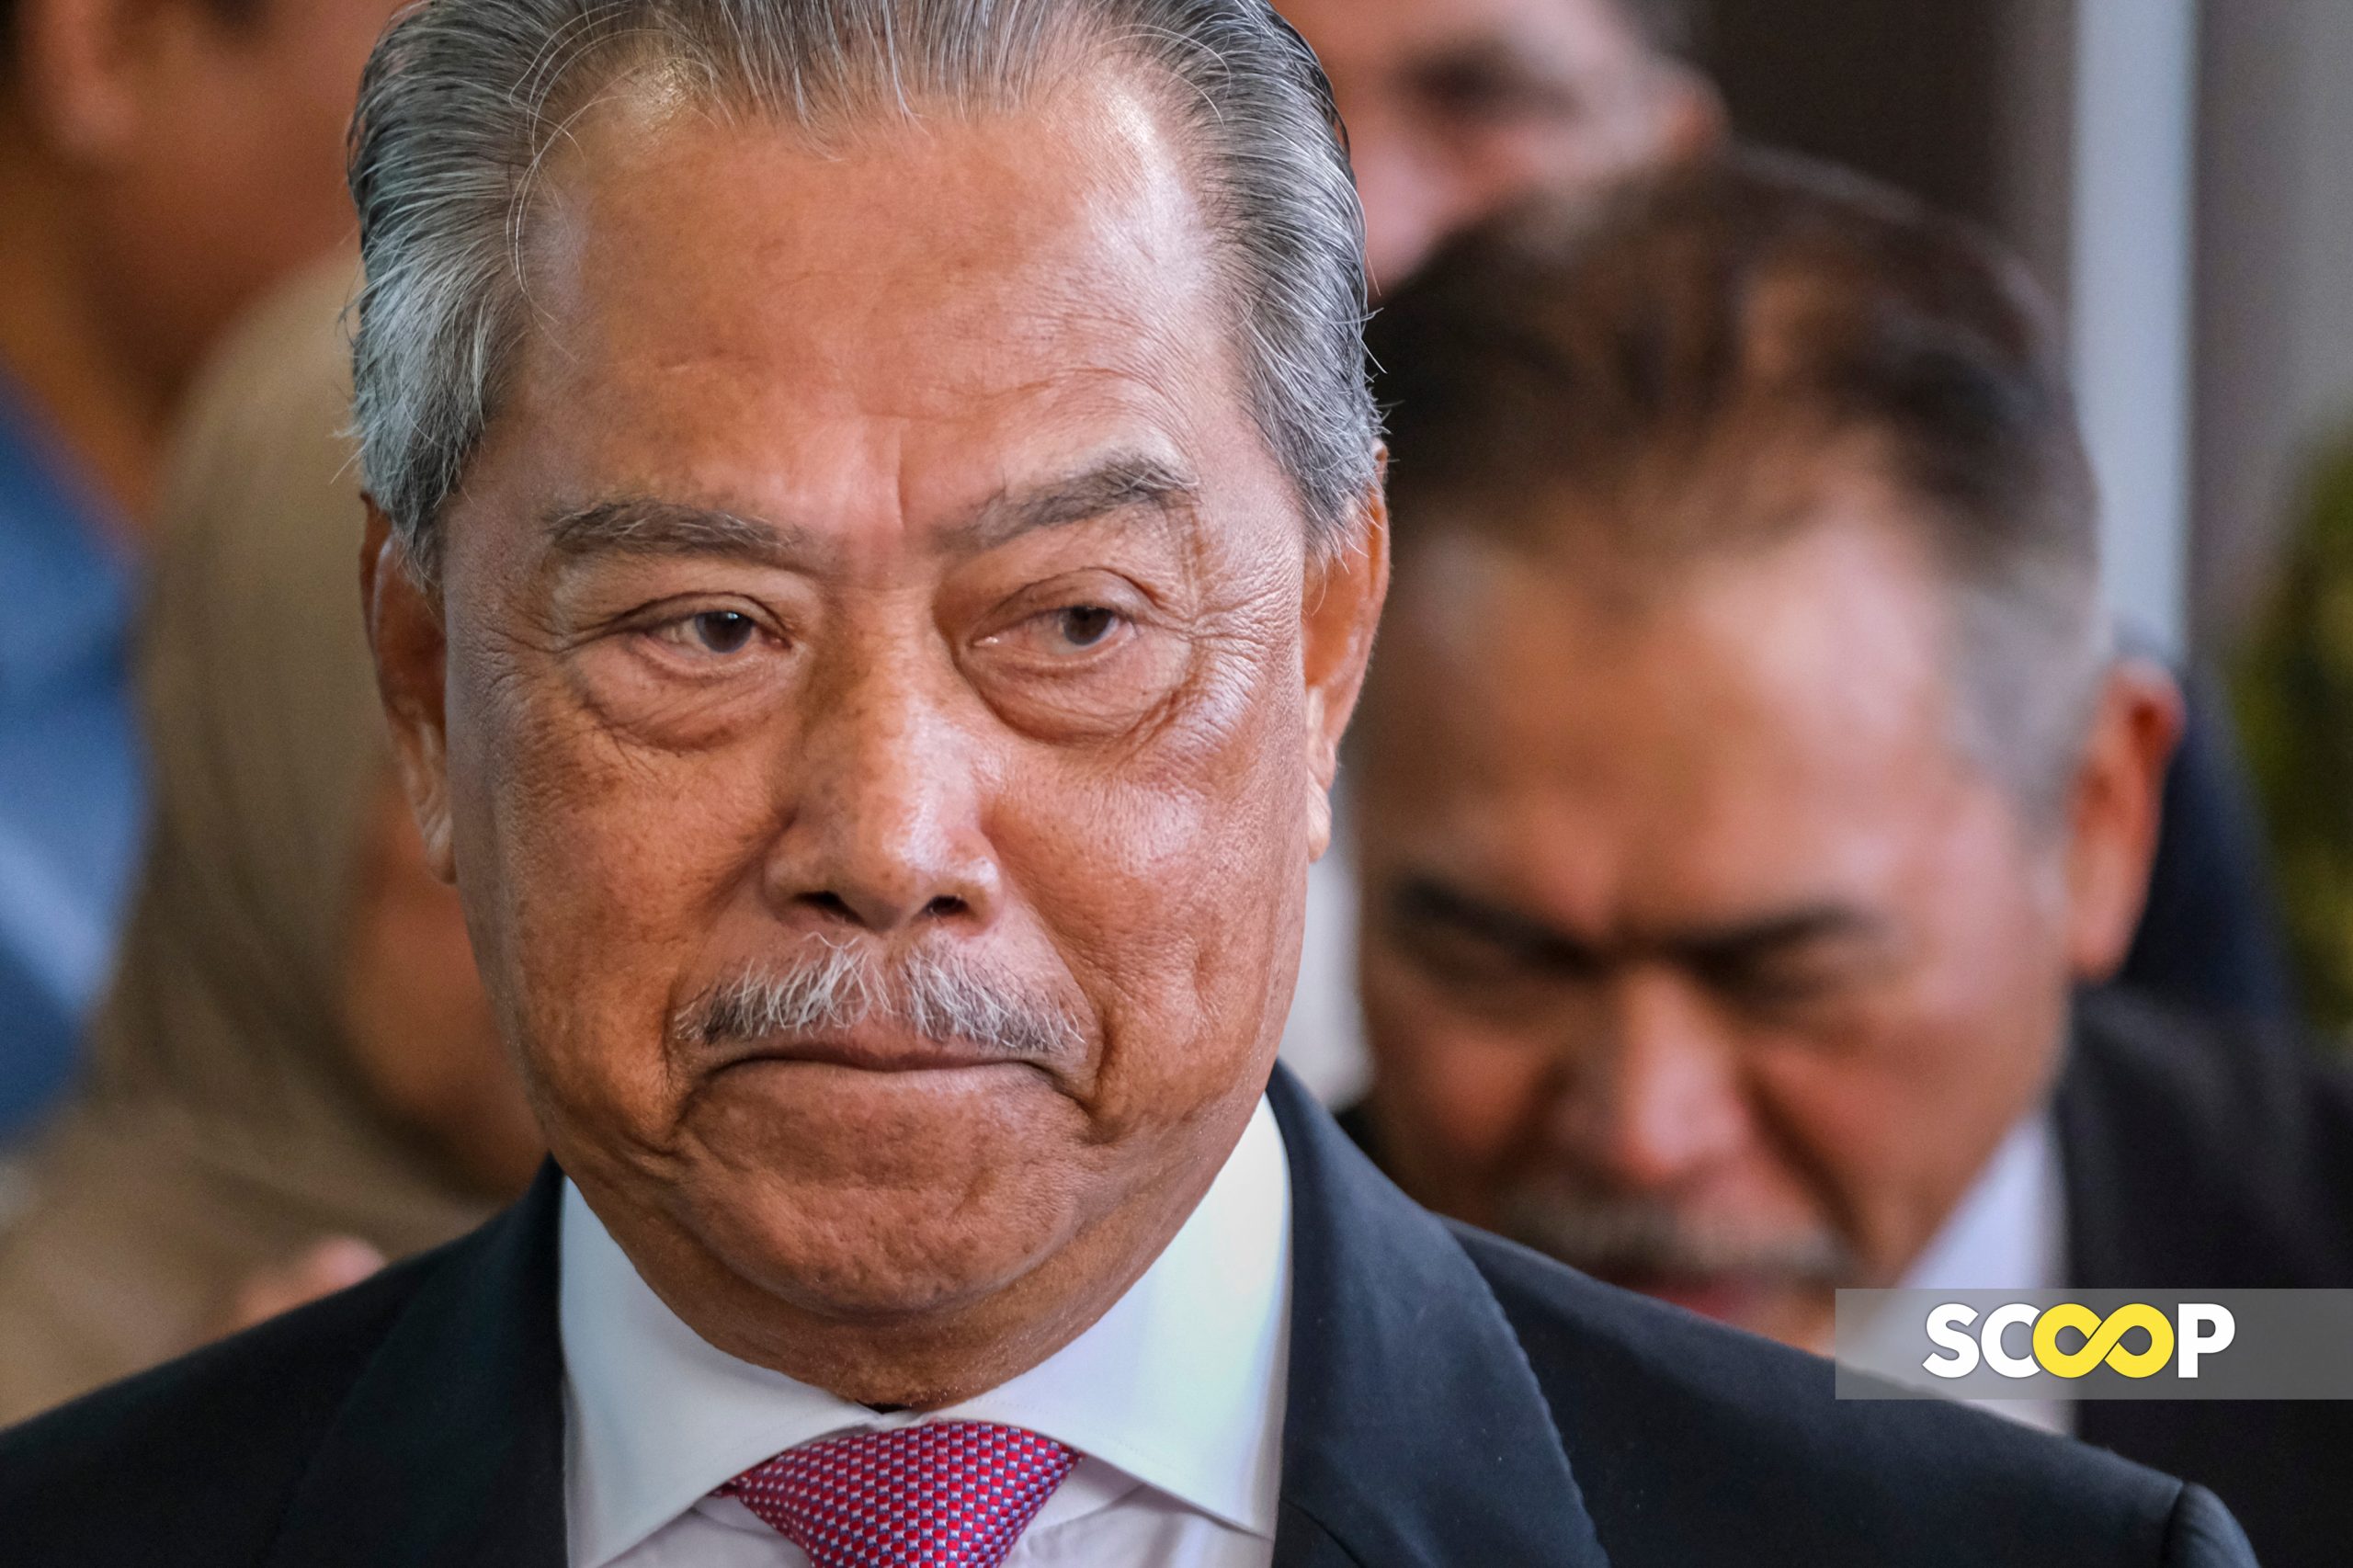 Cops question Muhyiddin again over alleged racially-charged speech